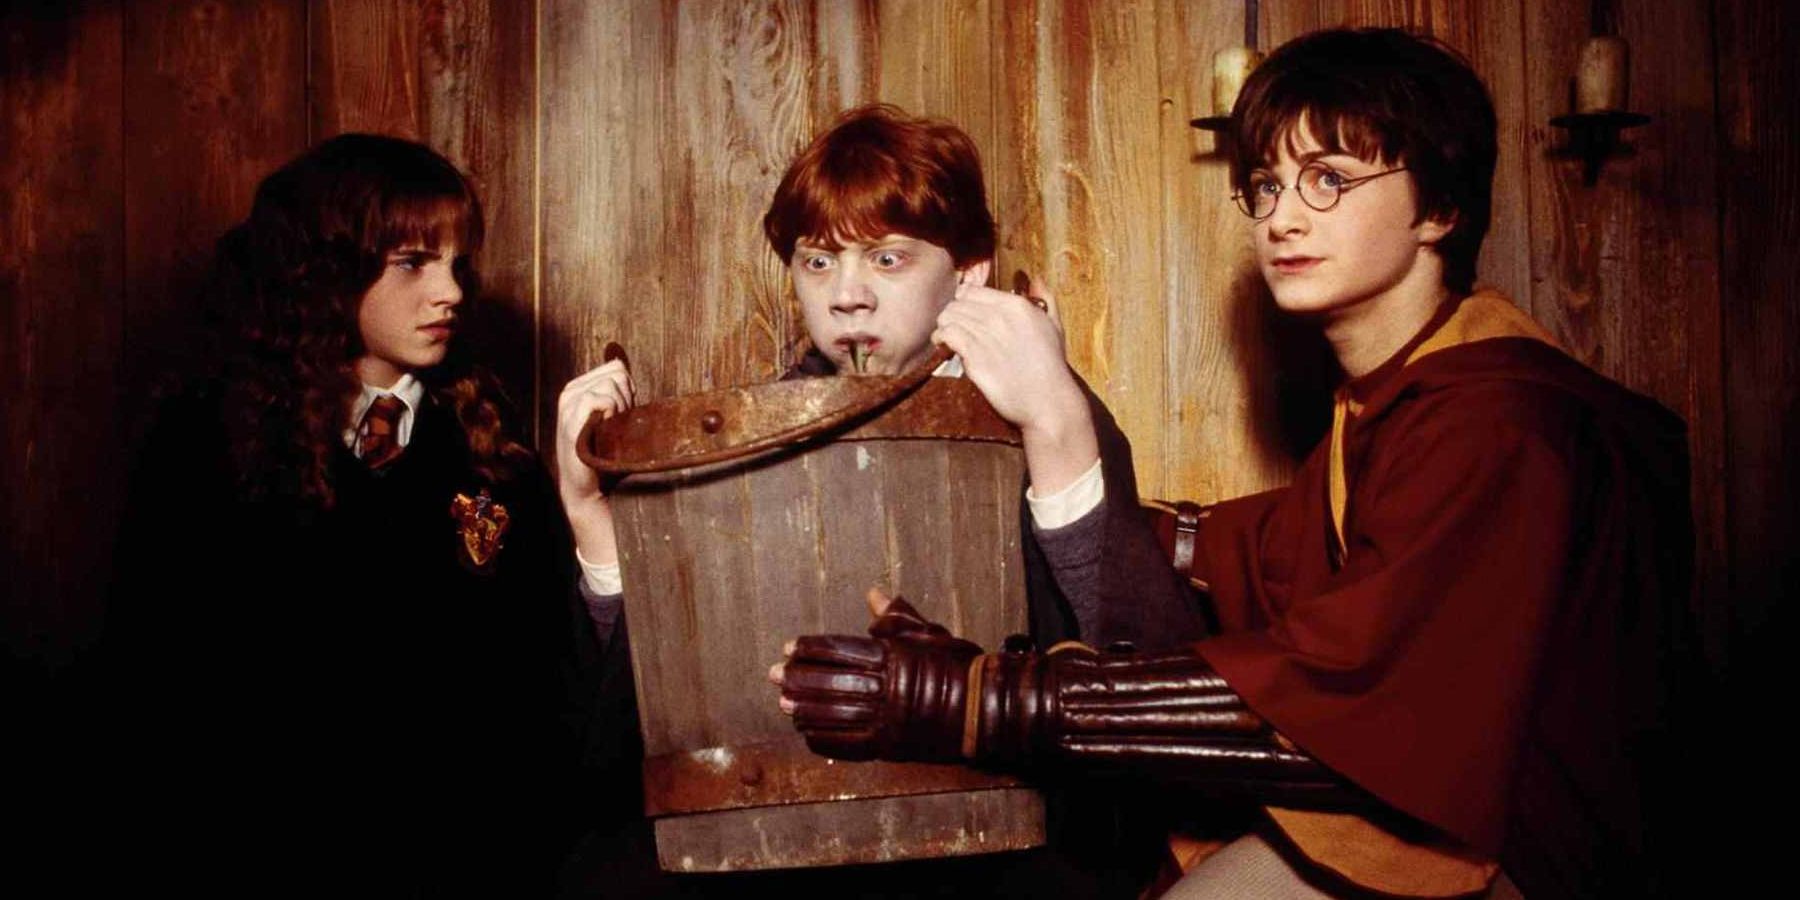 Harry Potter And The Chamber Of Secrets harry, hermione, and ron